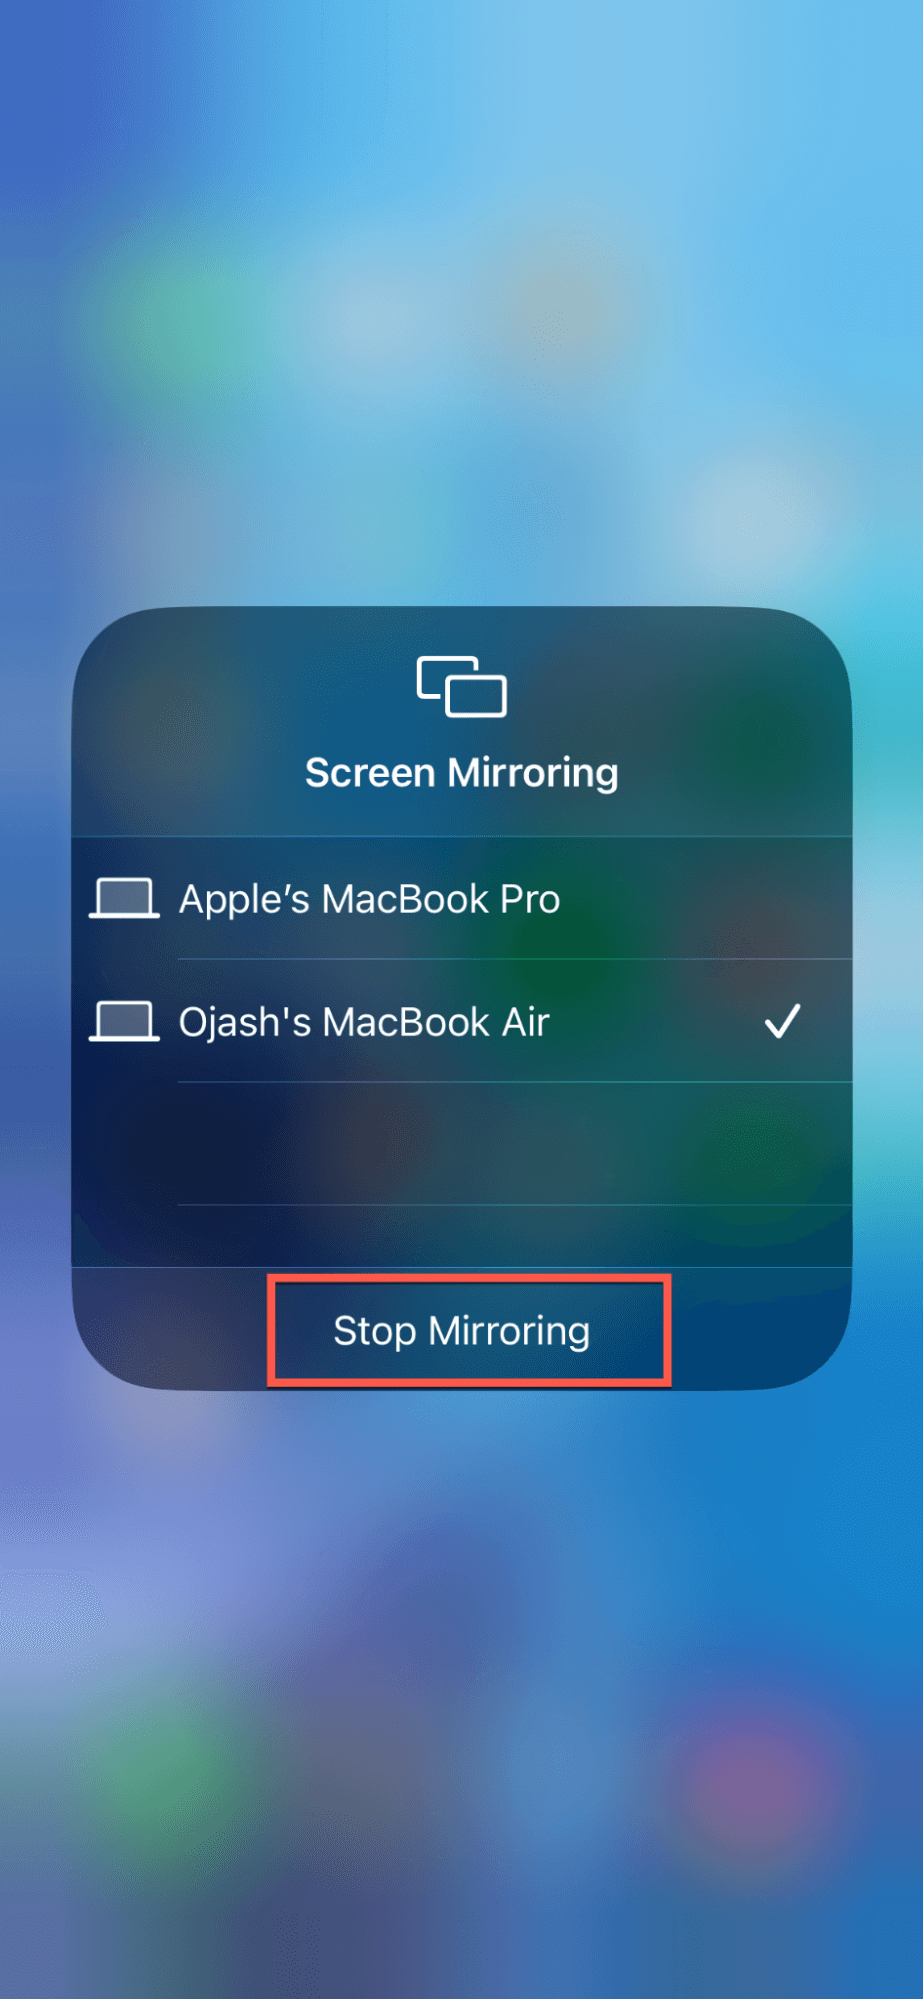 Tap on the Stop Mirroring button